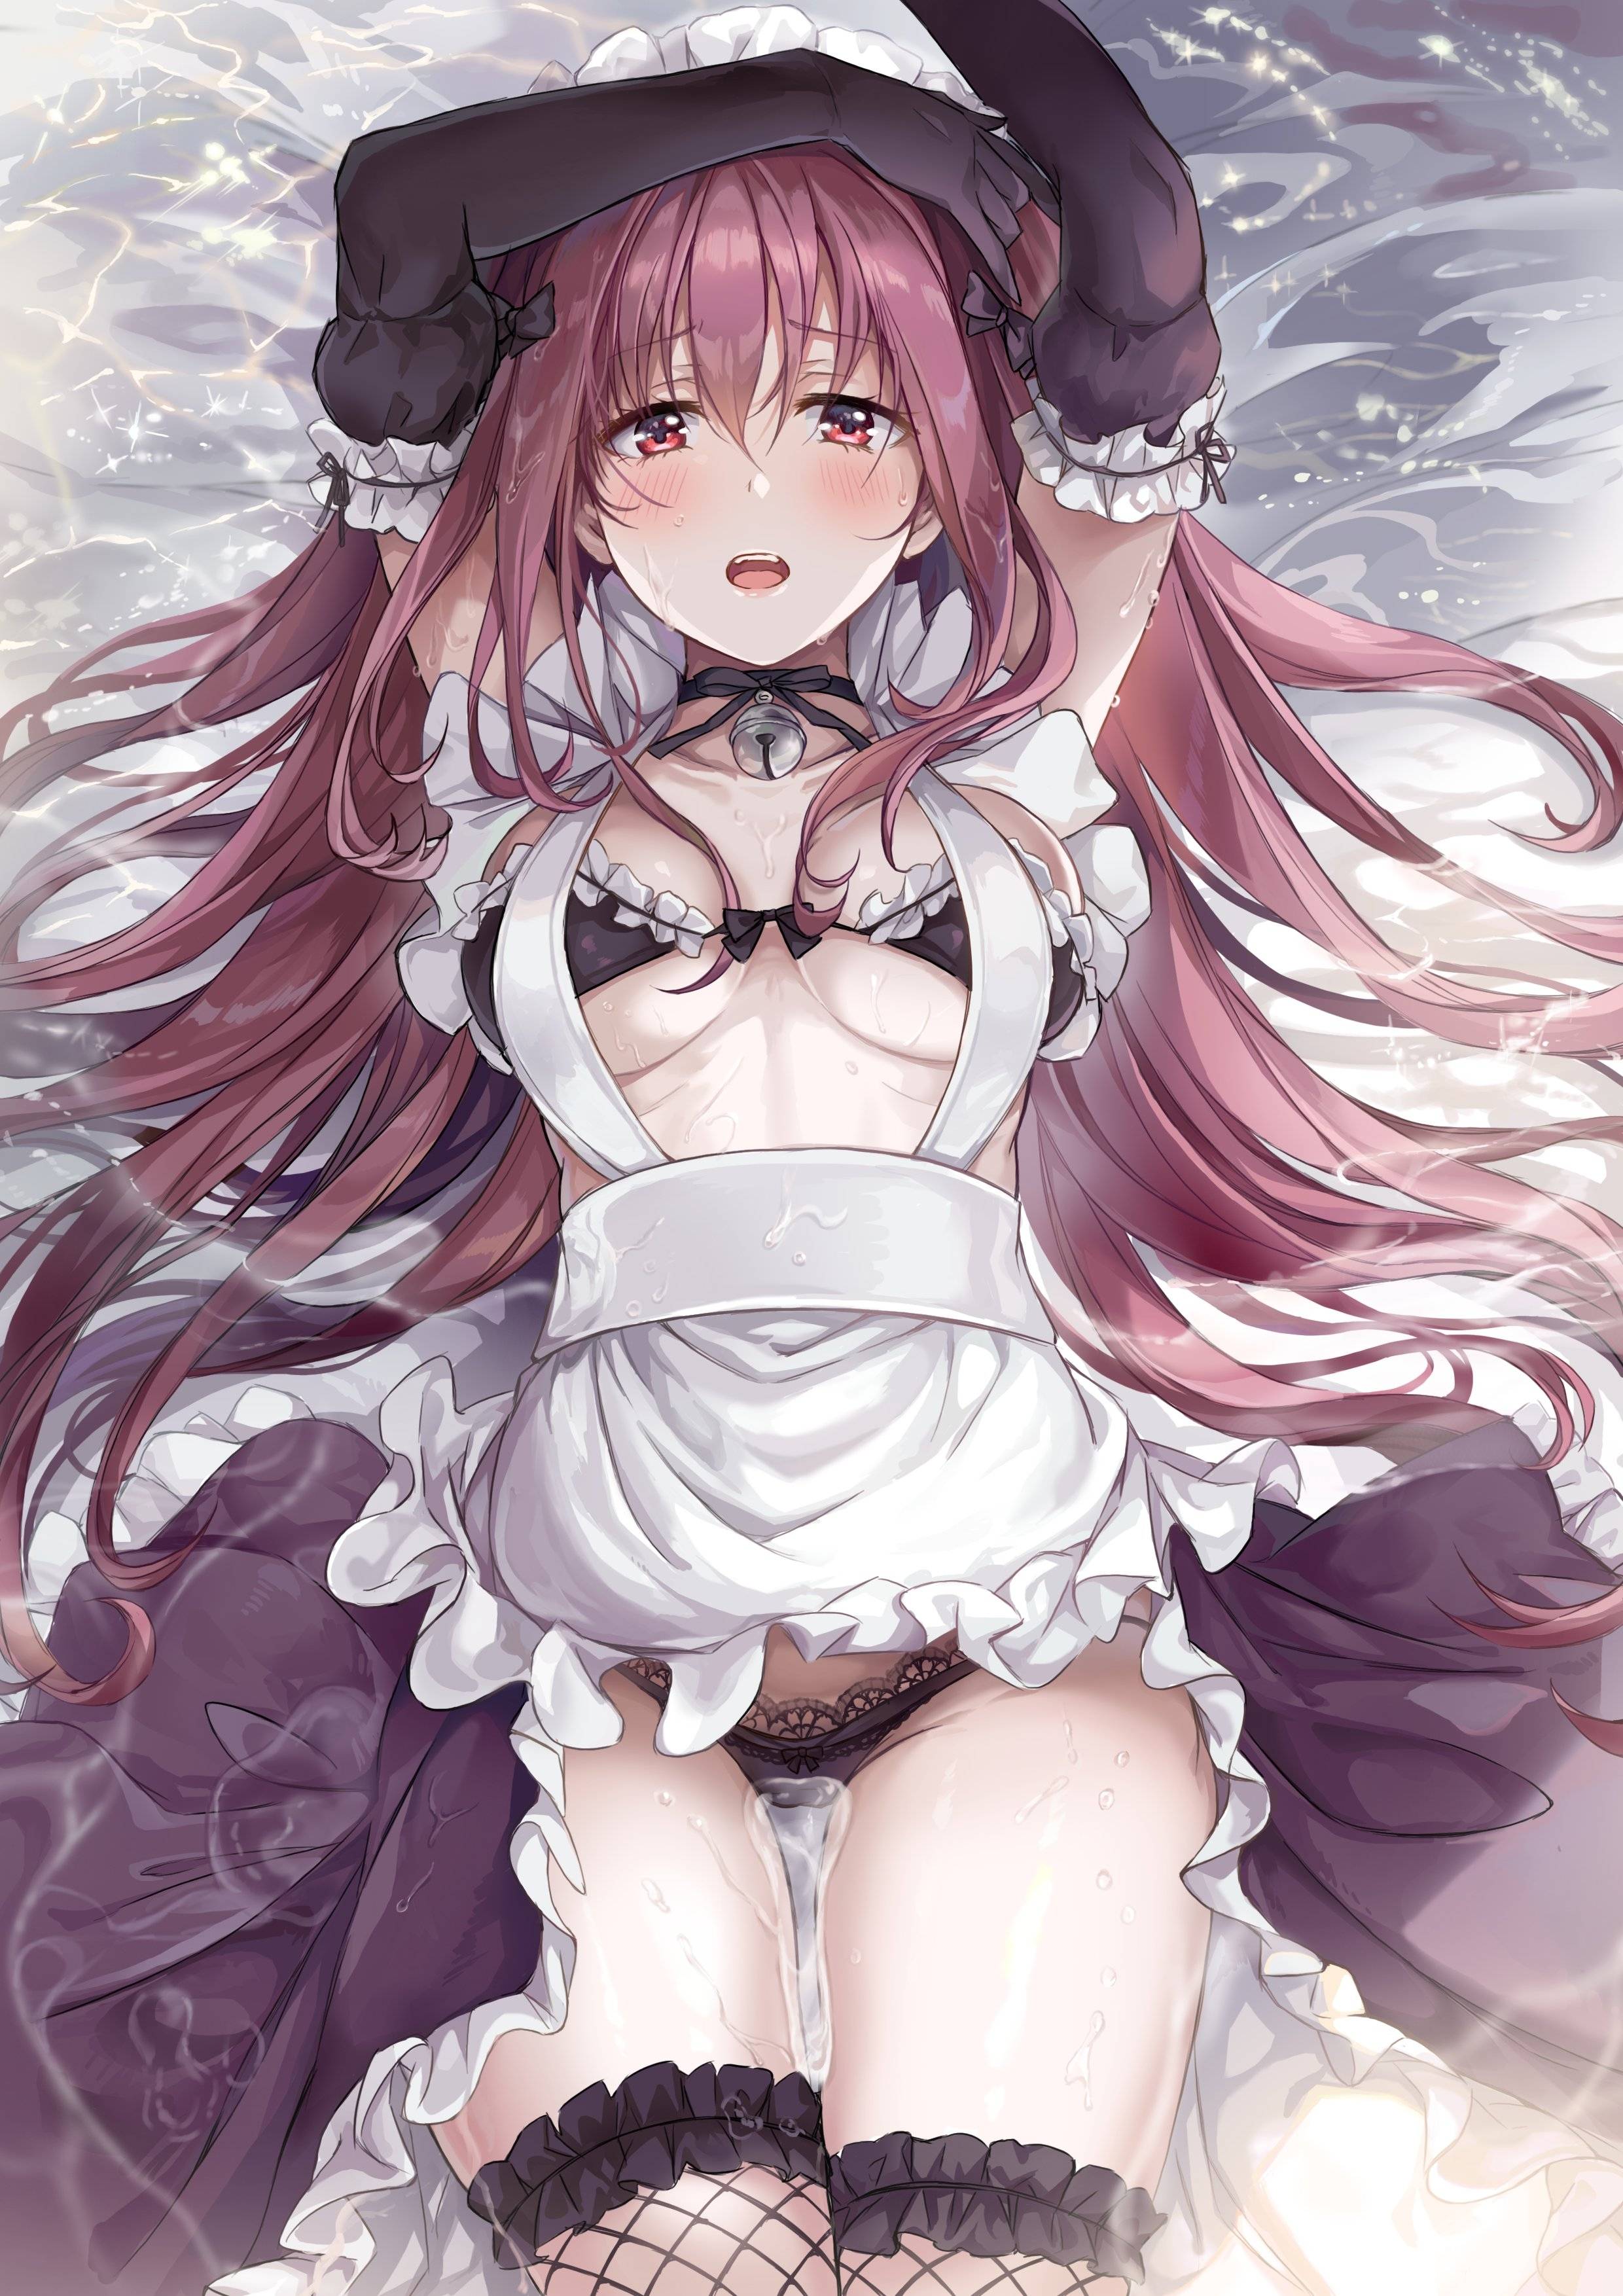 Anime 2480x3508 Fate series anime girls artwork portrait Fate/Grand Order Scathach Mychristian2 maid outfit maid bikini fishnet stockings lying on back water purple hair red eyes blushing